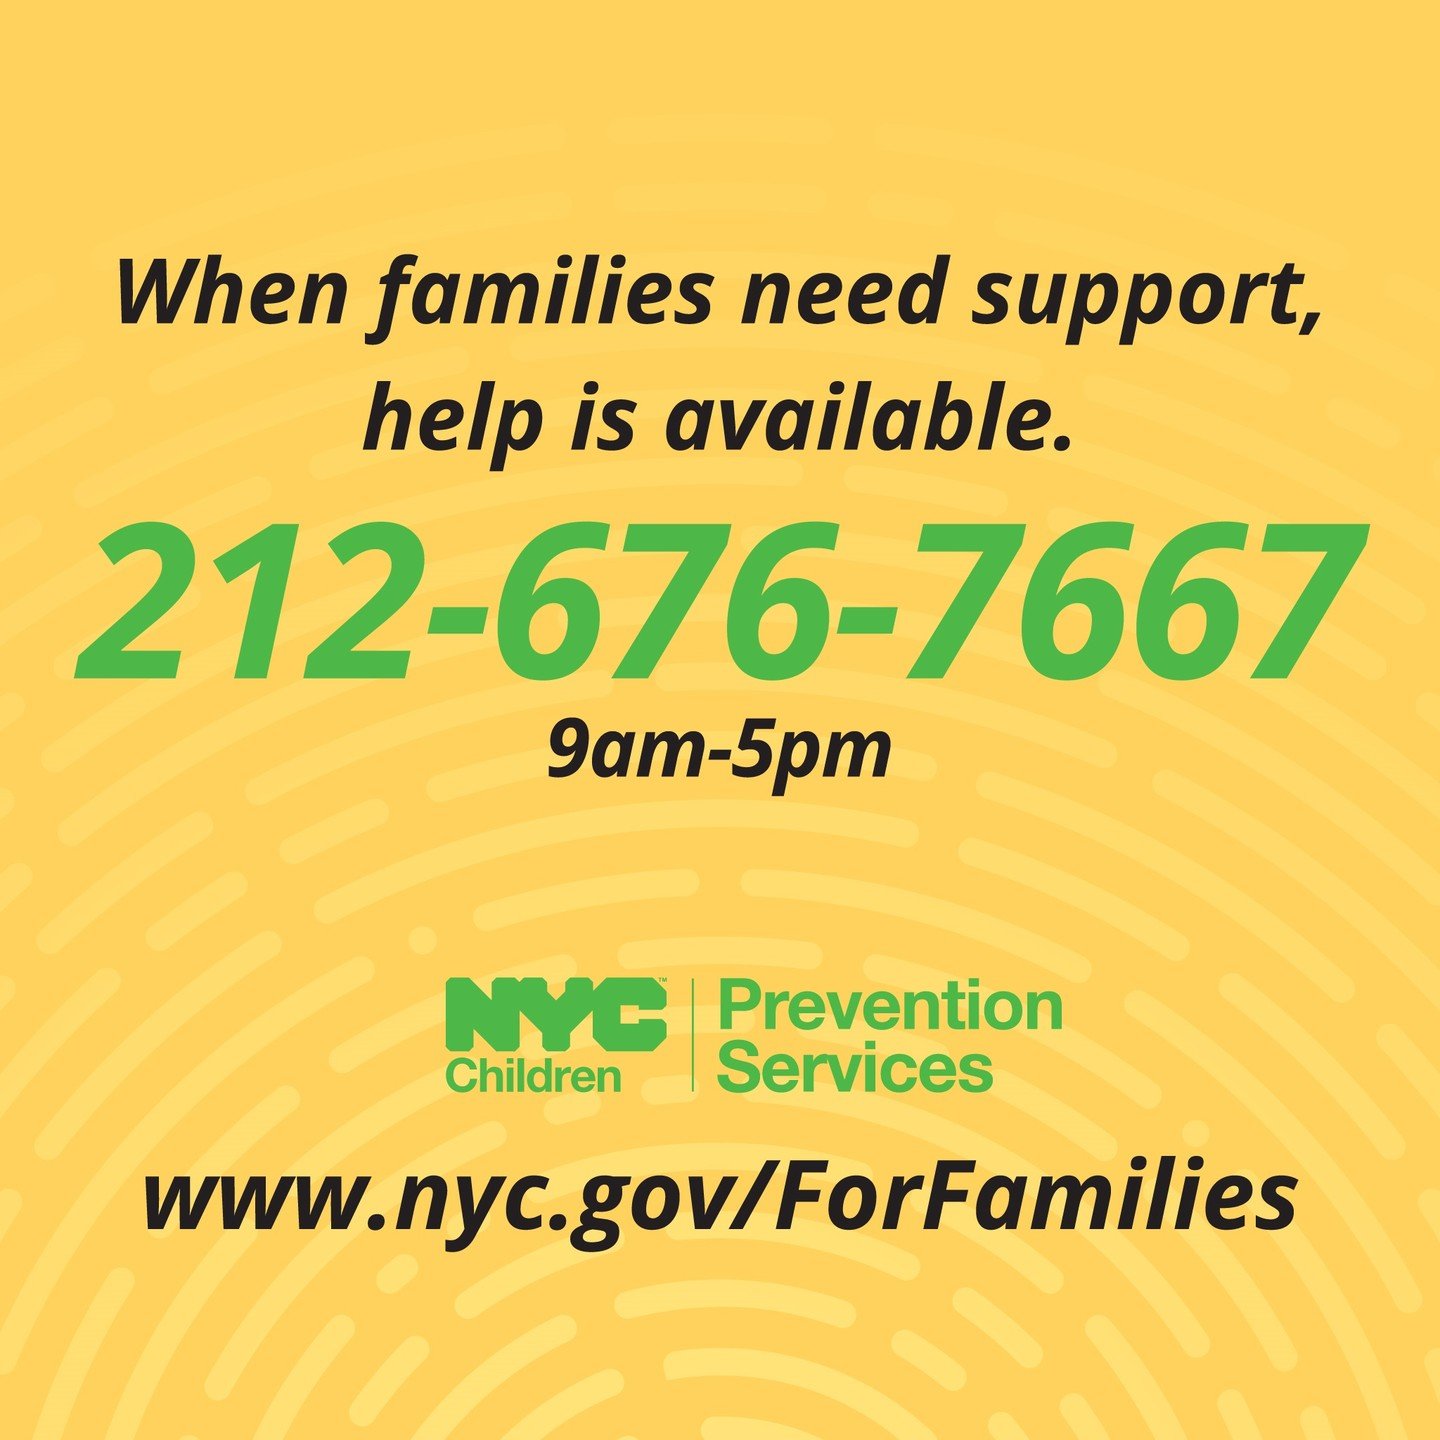 It takes a village to keep kids safe and families supported. This #ChildAbusePreventionMonth help us raise awareness about the wide range of services available to better support families across #NYC. Visit www.nyc.gov/ForFamilies for more information